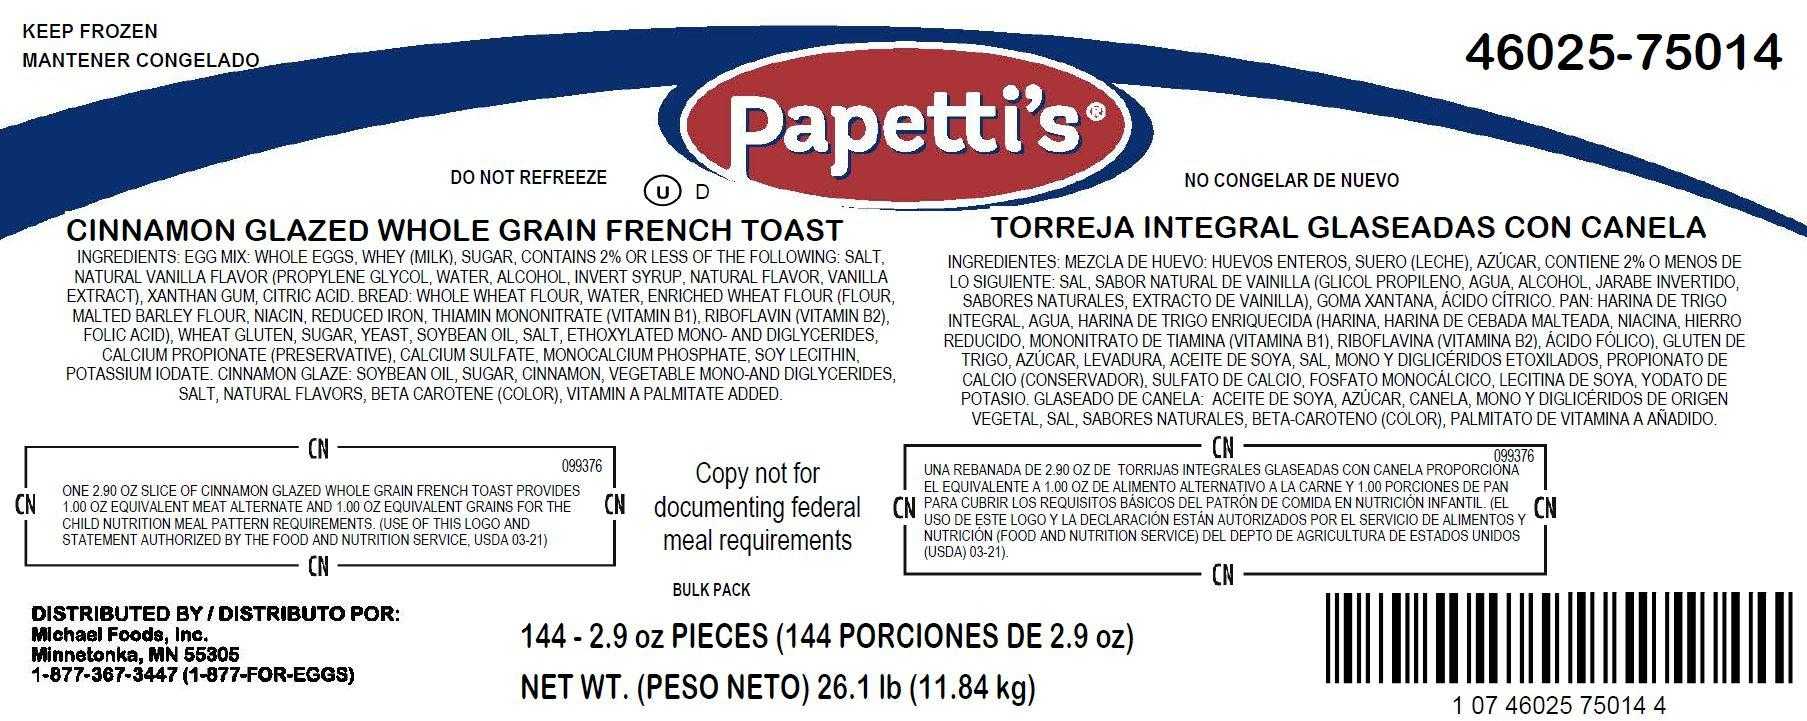 Papetti’s® Fully-Cooked Whole Grain Cinnamon Glaze French Toast, CN, 144/2.9 oz CN Labeled PDF